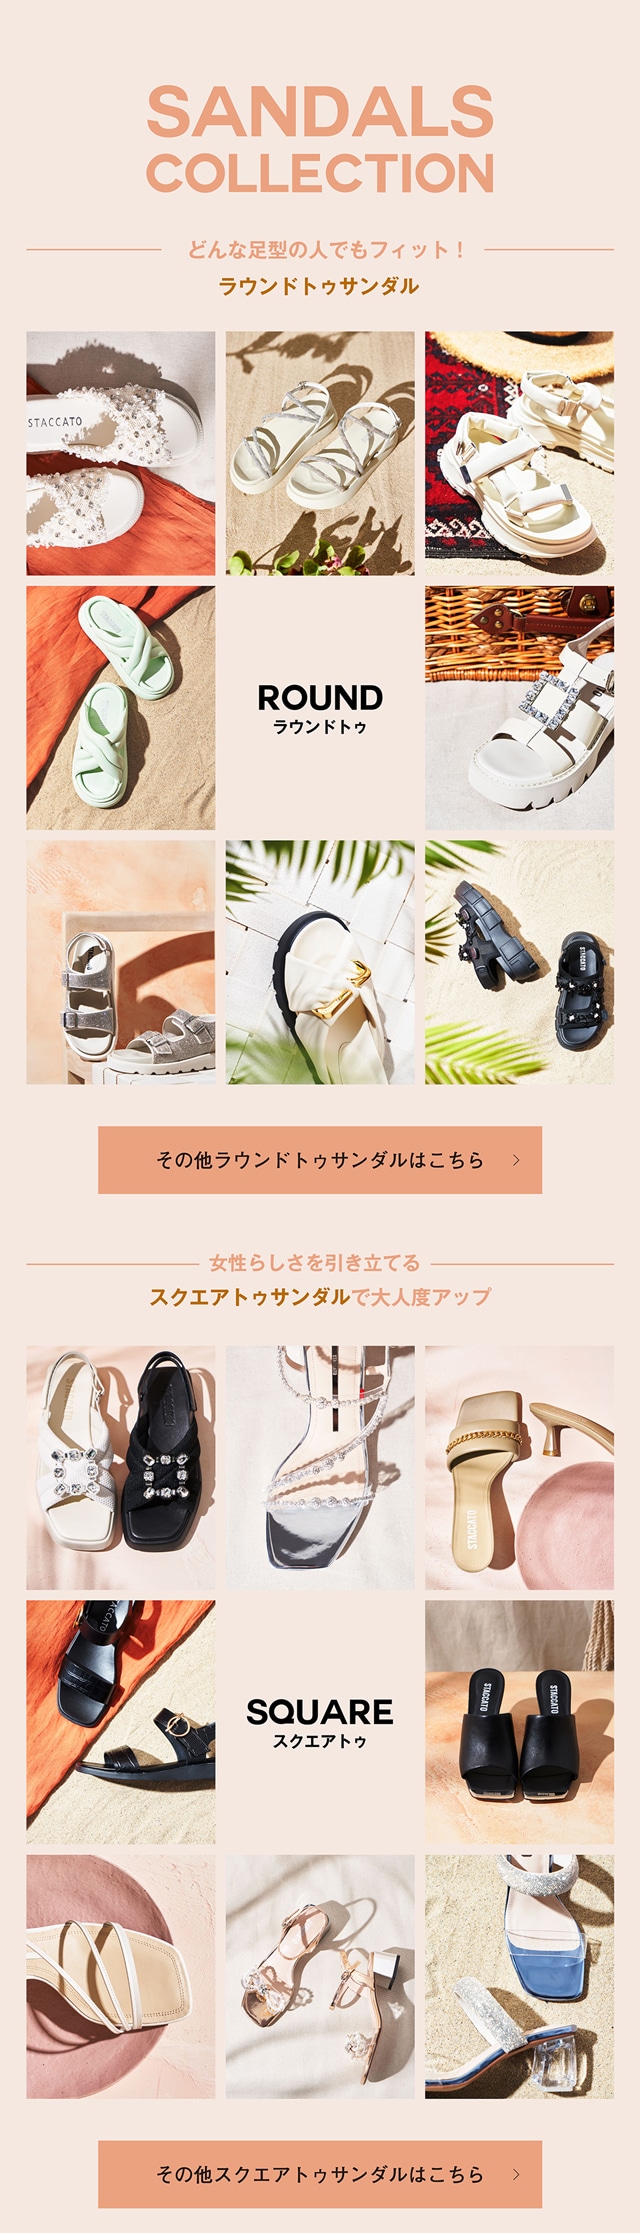 SANDALS COLLECTION】｜バロックジャパンリミテッド 公式通販サイト